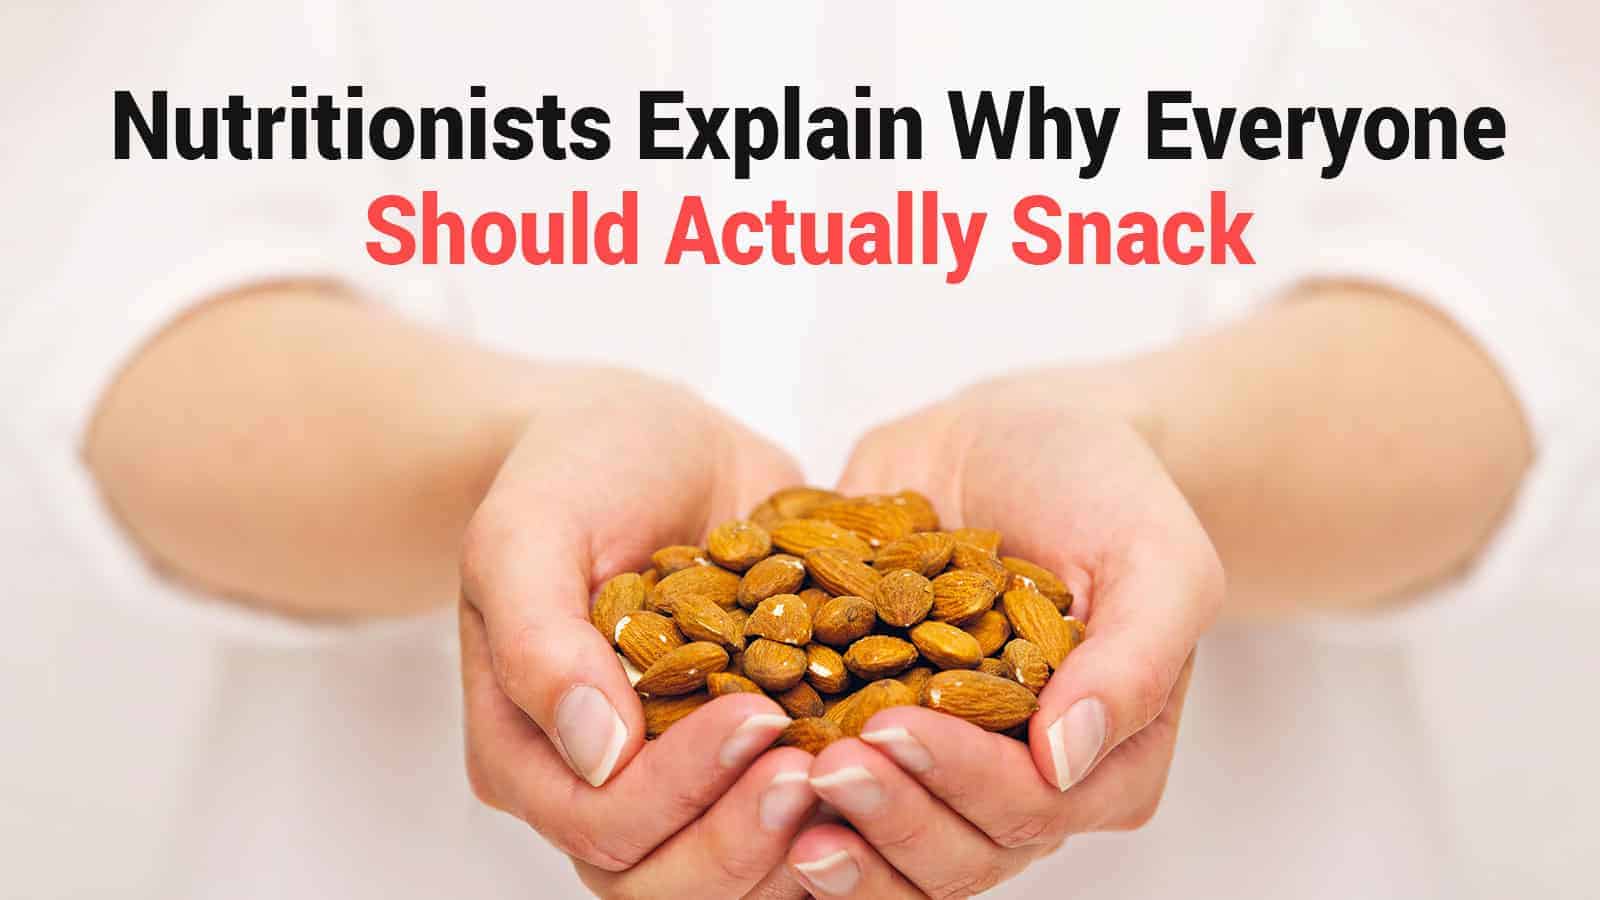 Nutritionists Explain Why Everyone Should Actually Snack